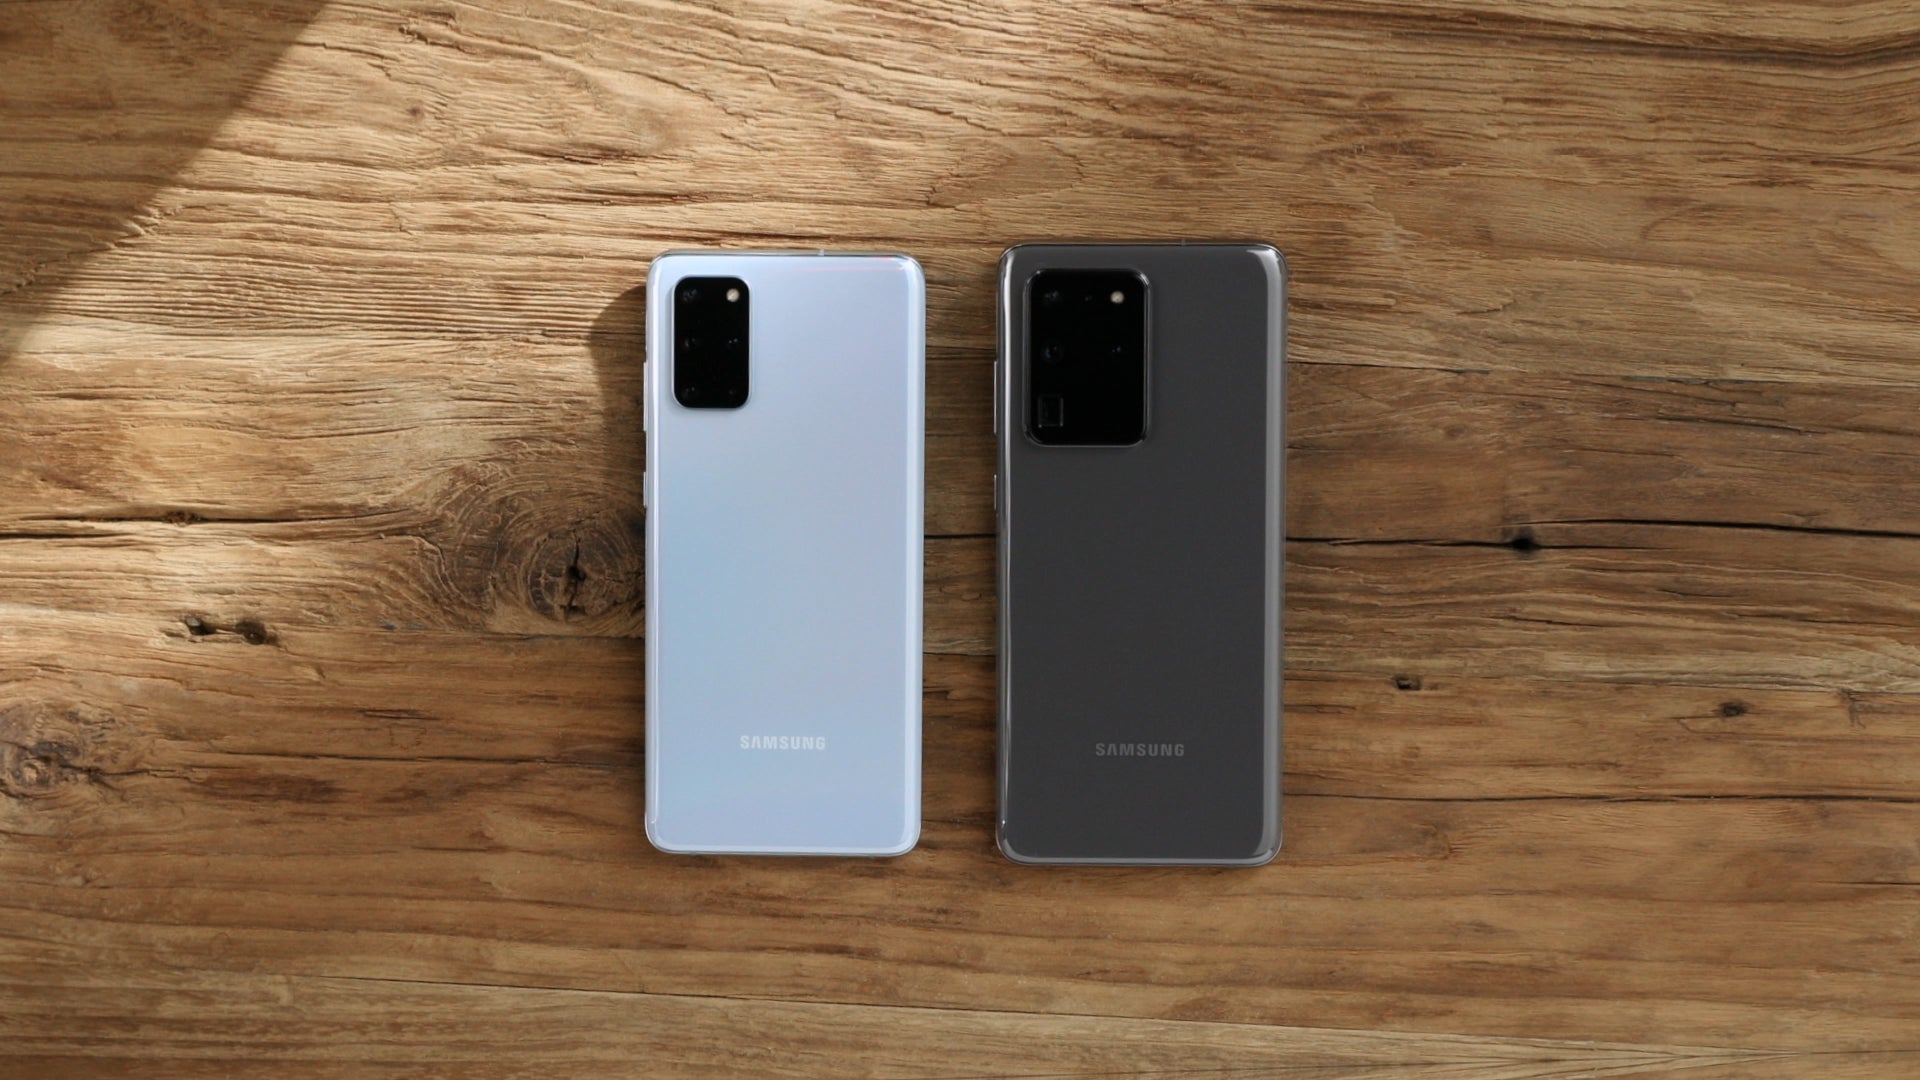 The Samsung Galaxy S20+ compared to the S20 Ultra.  - The flagship Galaxy S20 series becomes extremely affordable thanks to these Black Friday deals!